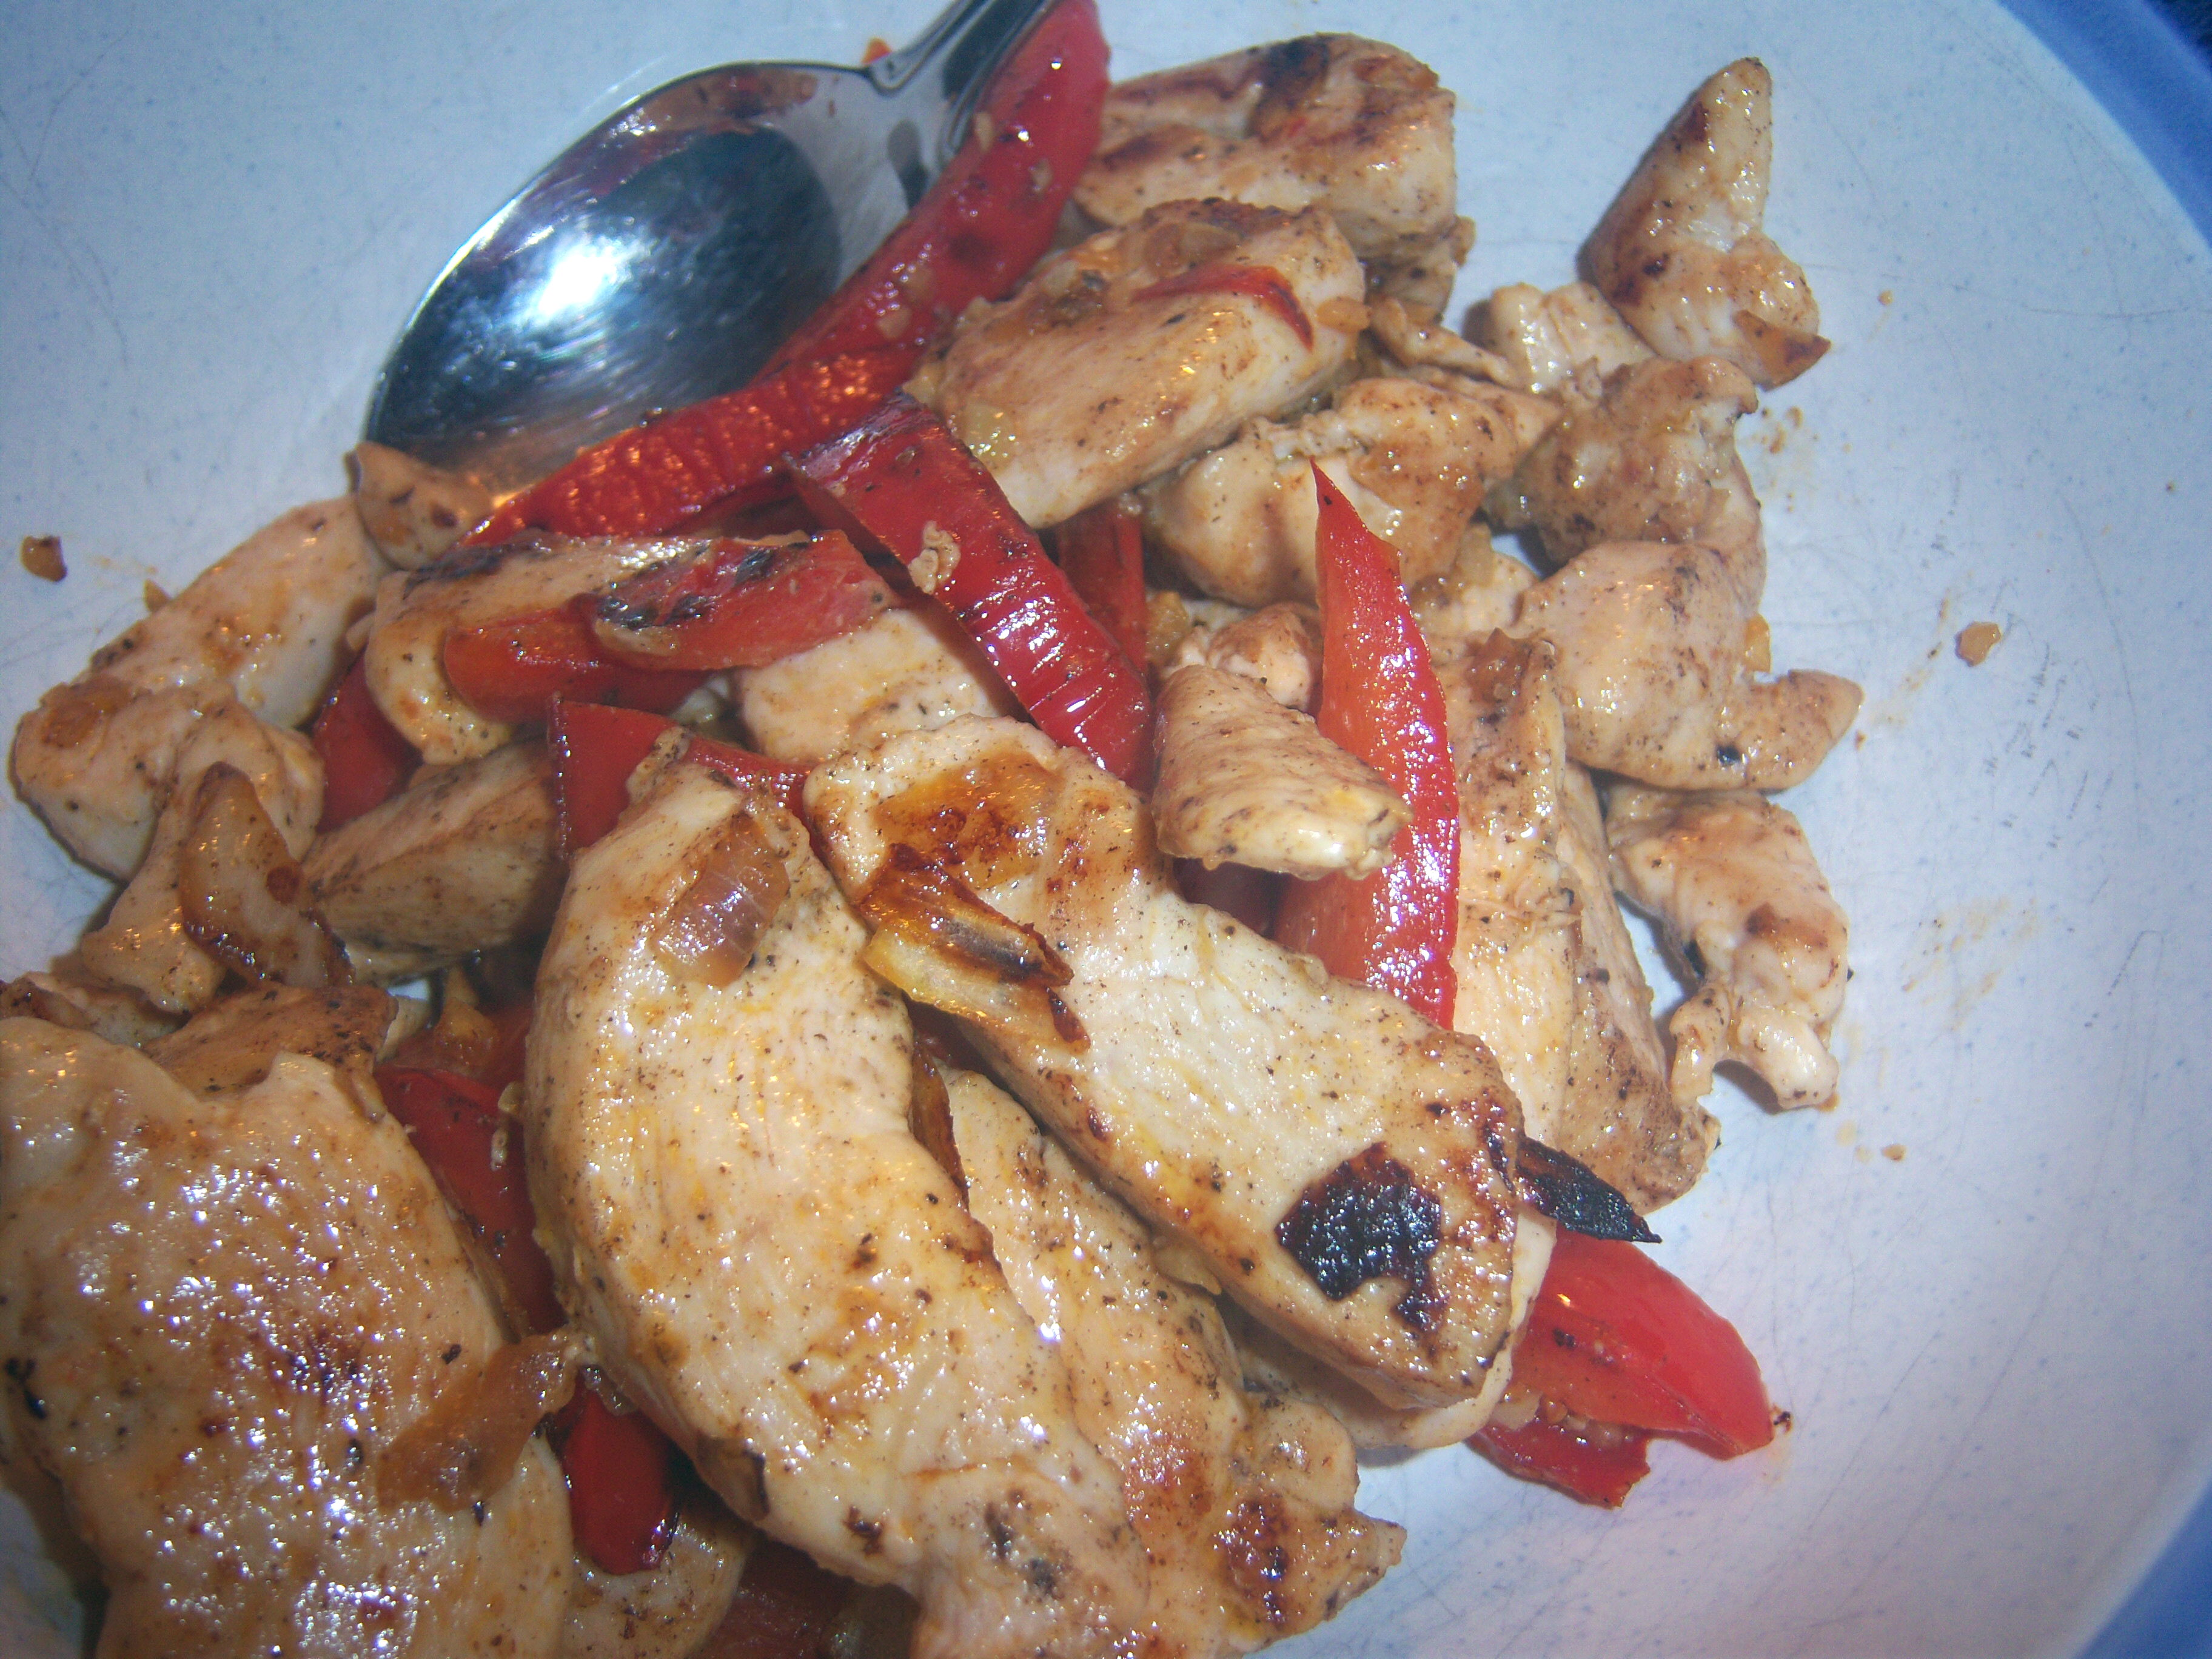 Chicken, peppers, and onions